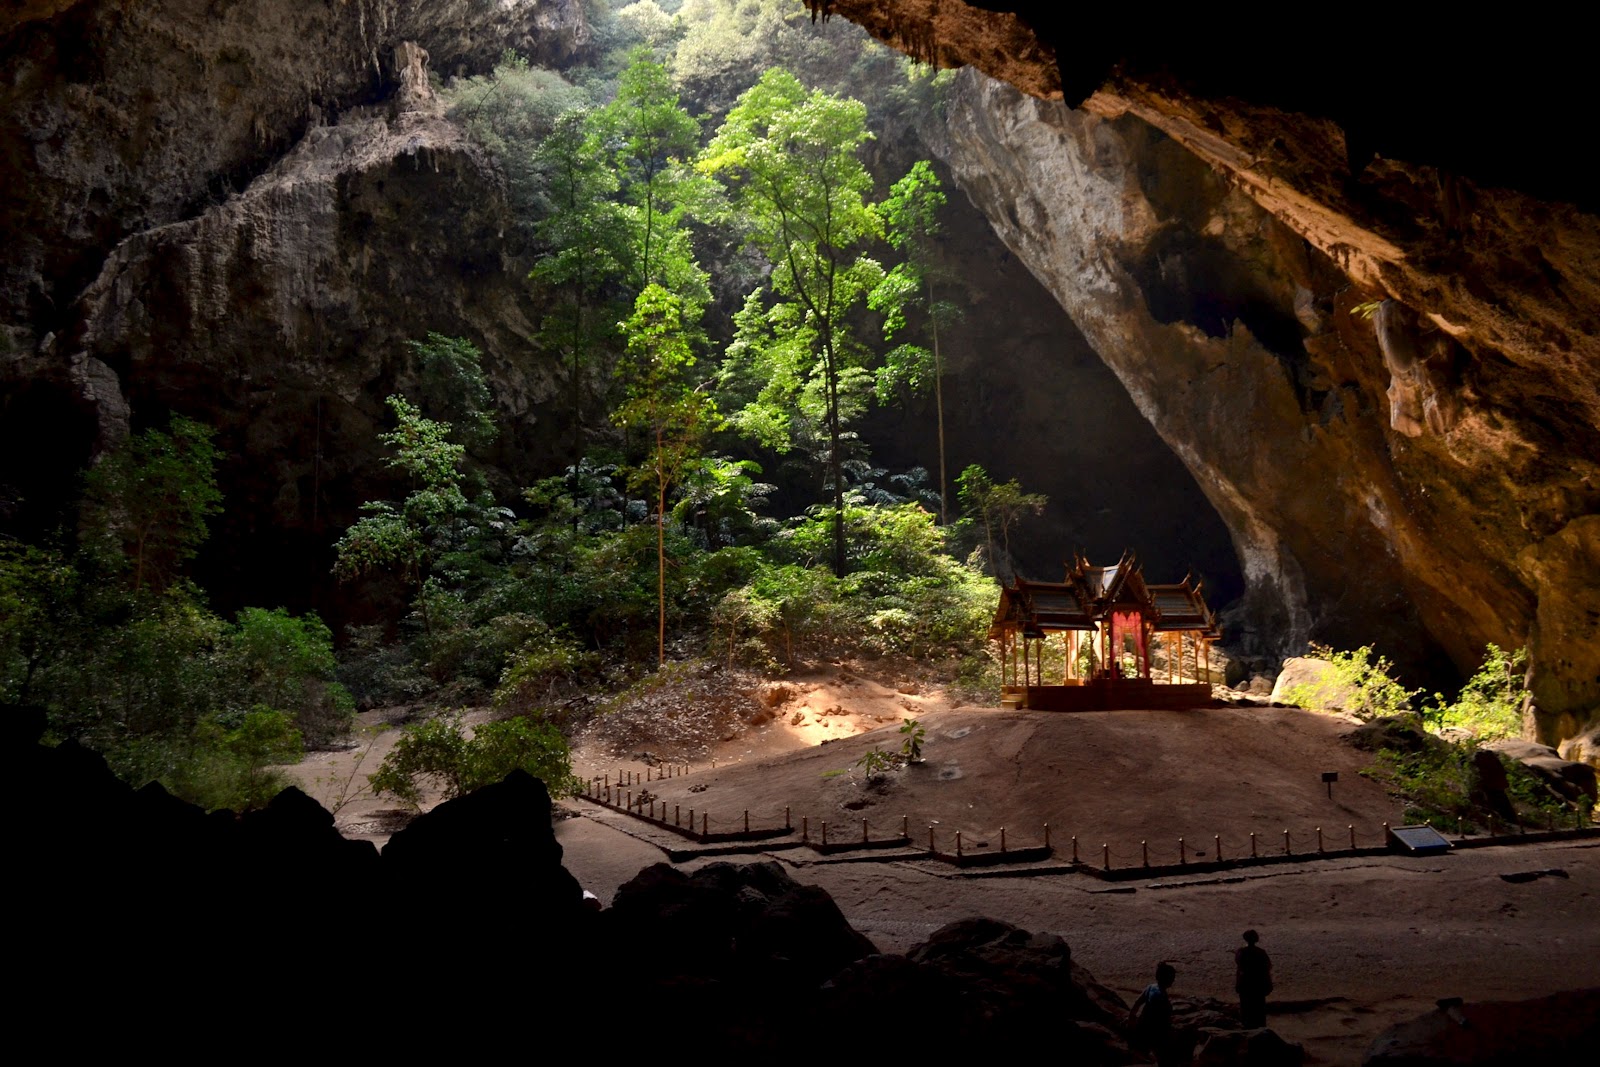 Phraya Nakhon Cave Thailand- Inside the Khao Sam Roi Yot National Park is the Phraya Nakhon: an incredible cave with an interesting history behind it. Sunlight filters through the top of the structure's collapsed ceiling, illuminating the Kuha Karuhas pavilion that was originally built in 1890 for King Chulalongkorn. Since it's construction, other local kings have visited the cave and left their signatures on it's walls.